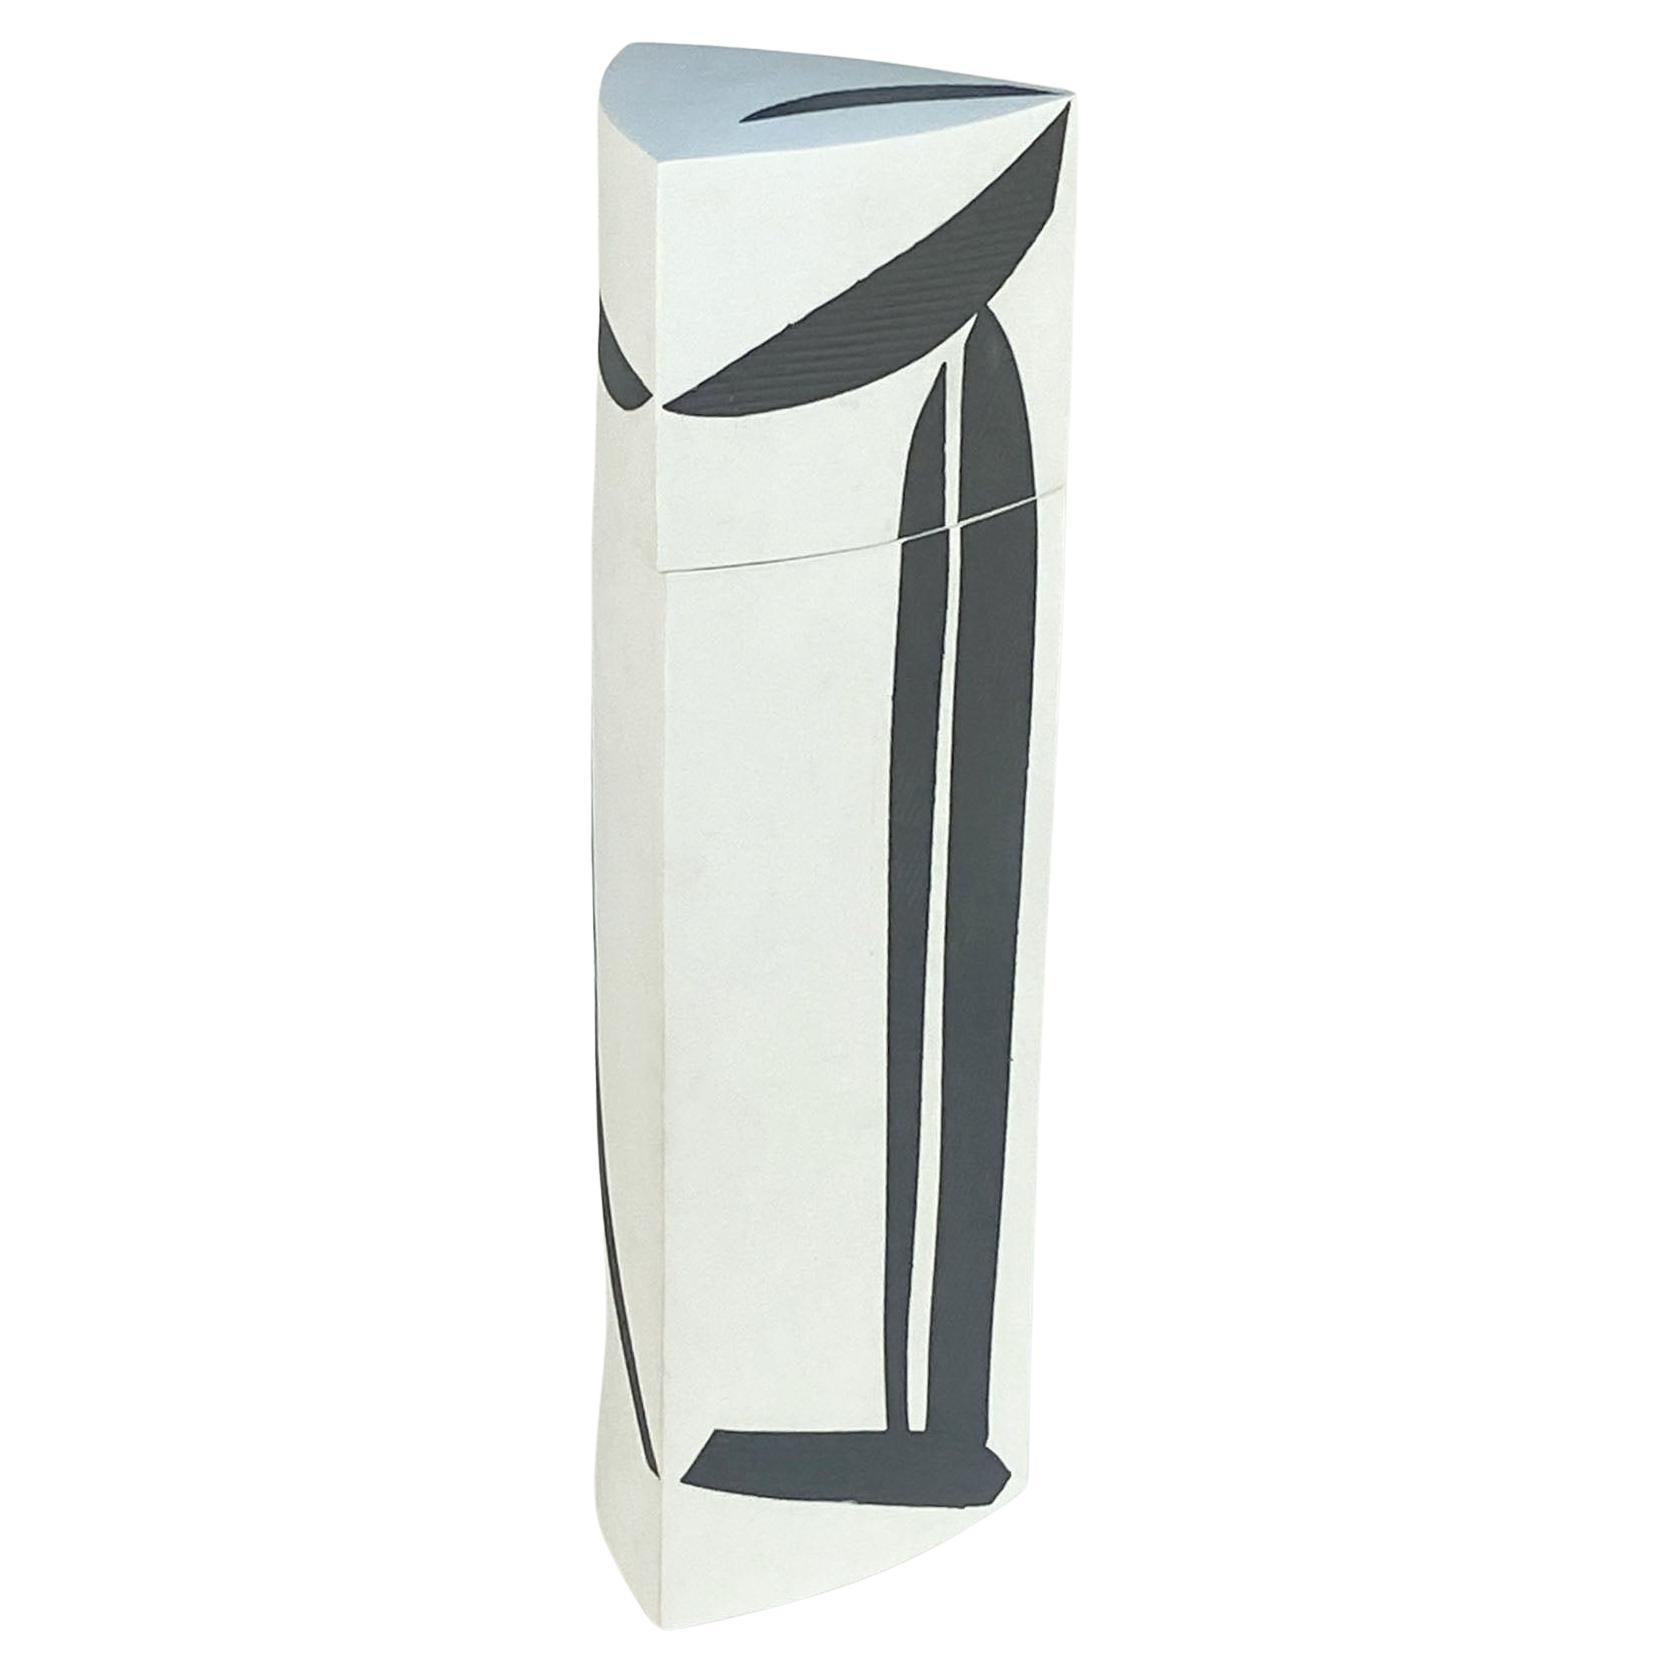 Tall ornamental art vessel in triangular form with lid is hand formed in porcelain by international acclaimed ceramist Jutta Albert (B 1954, Germany). The white un-glazed body is elegantly decorated with inserted indigo porcelain relief shapes,